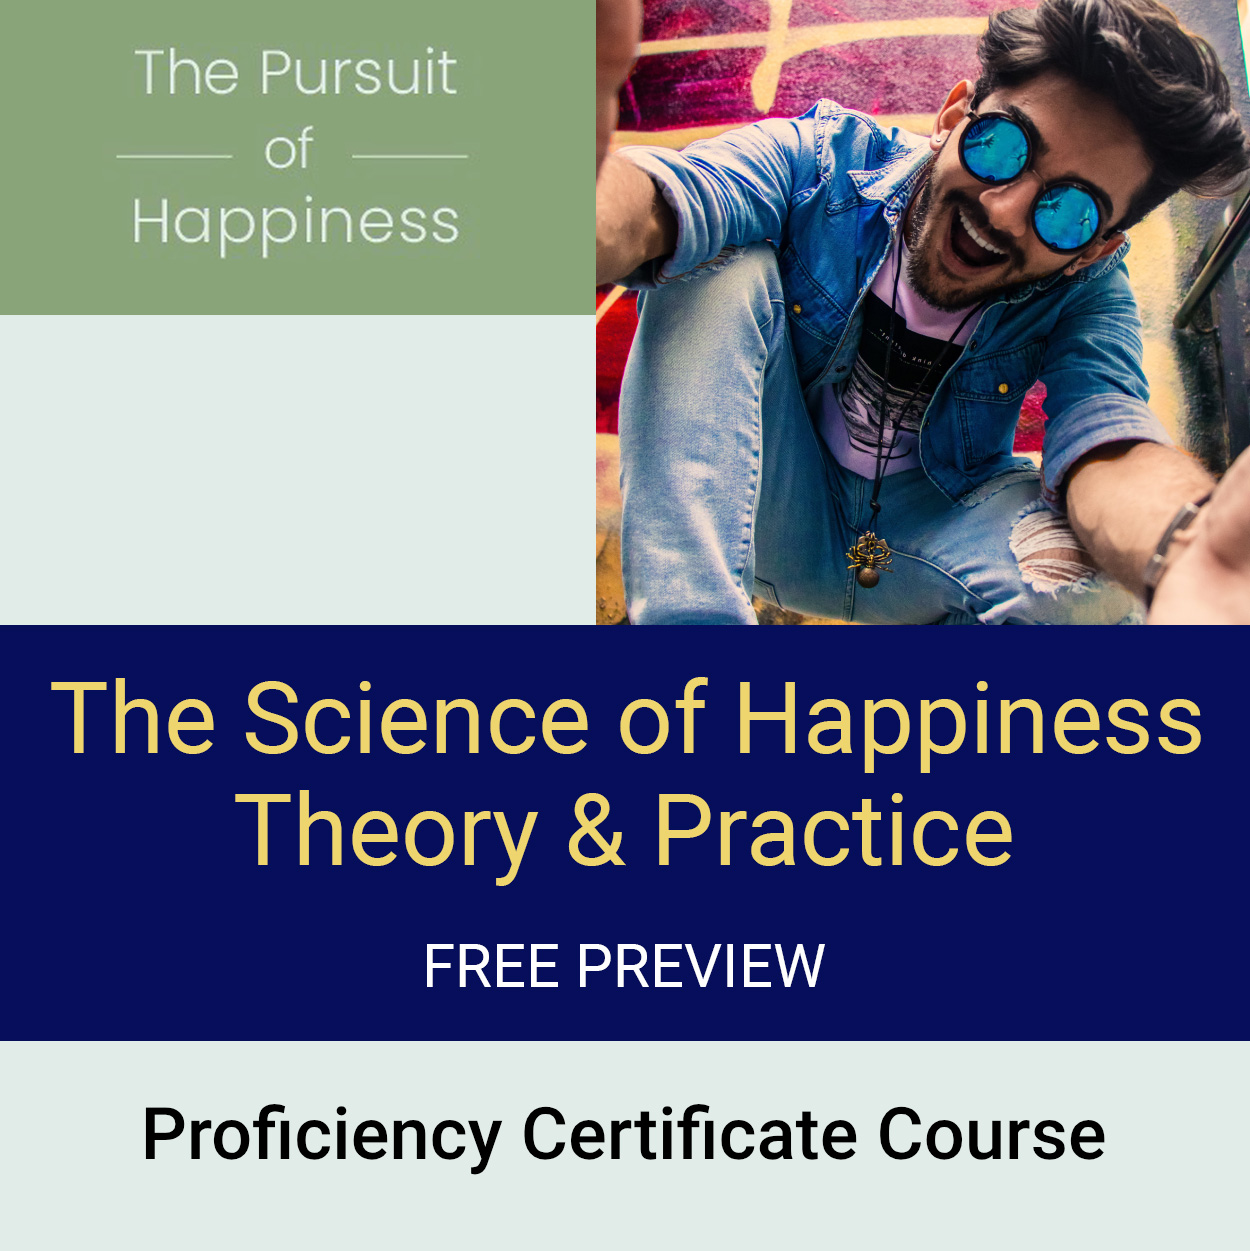 Science of Happiness Proficiency Certificate Course